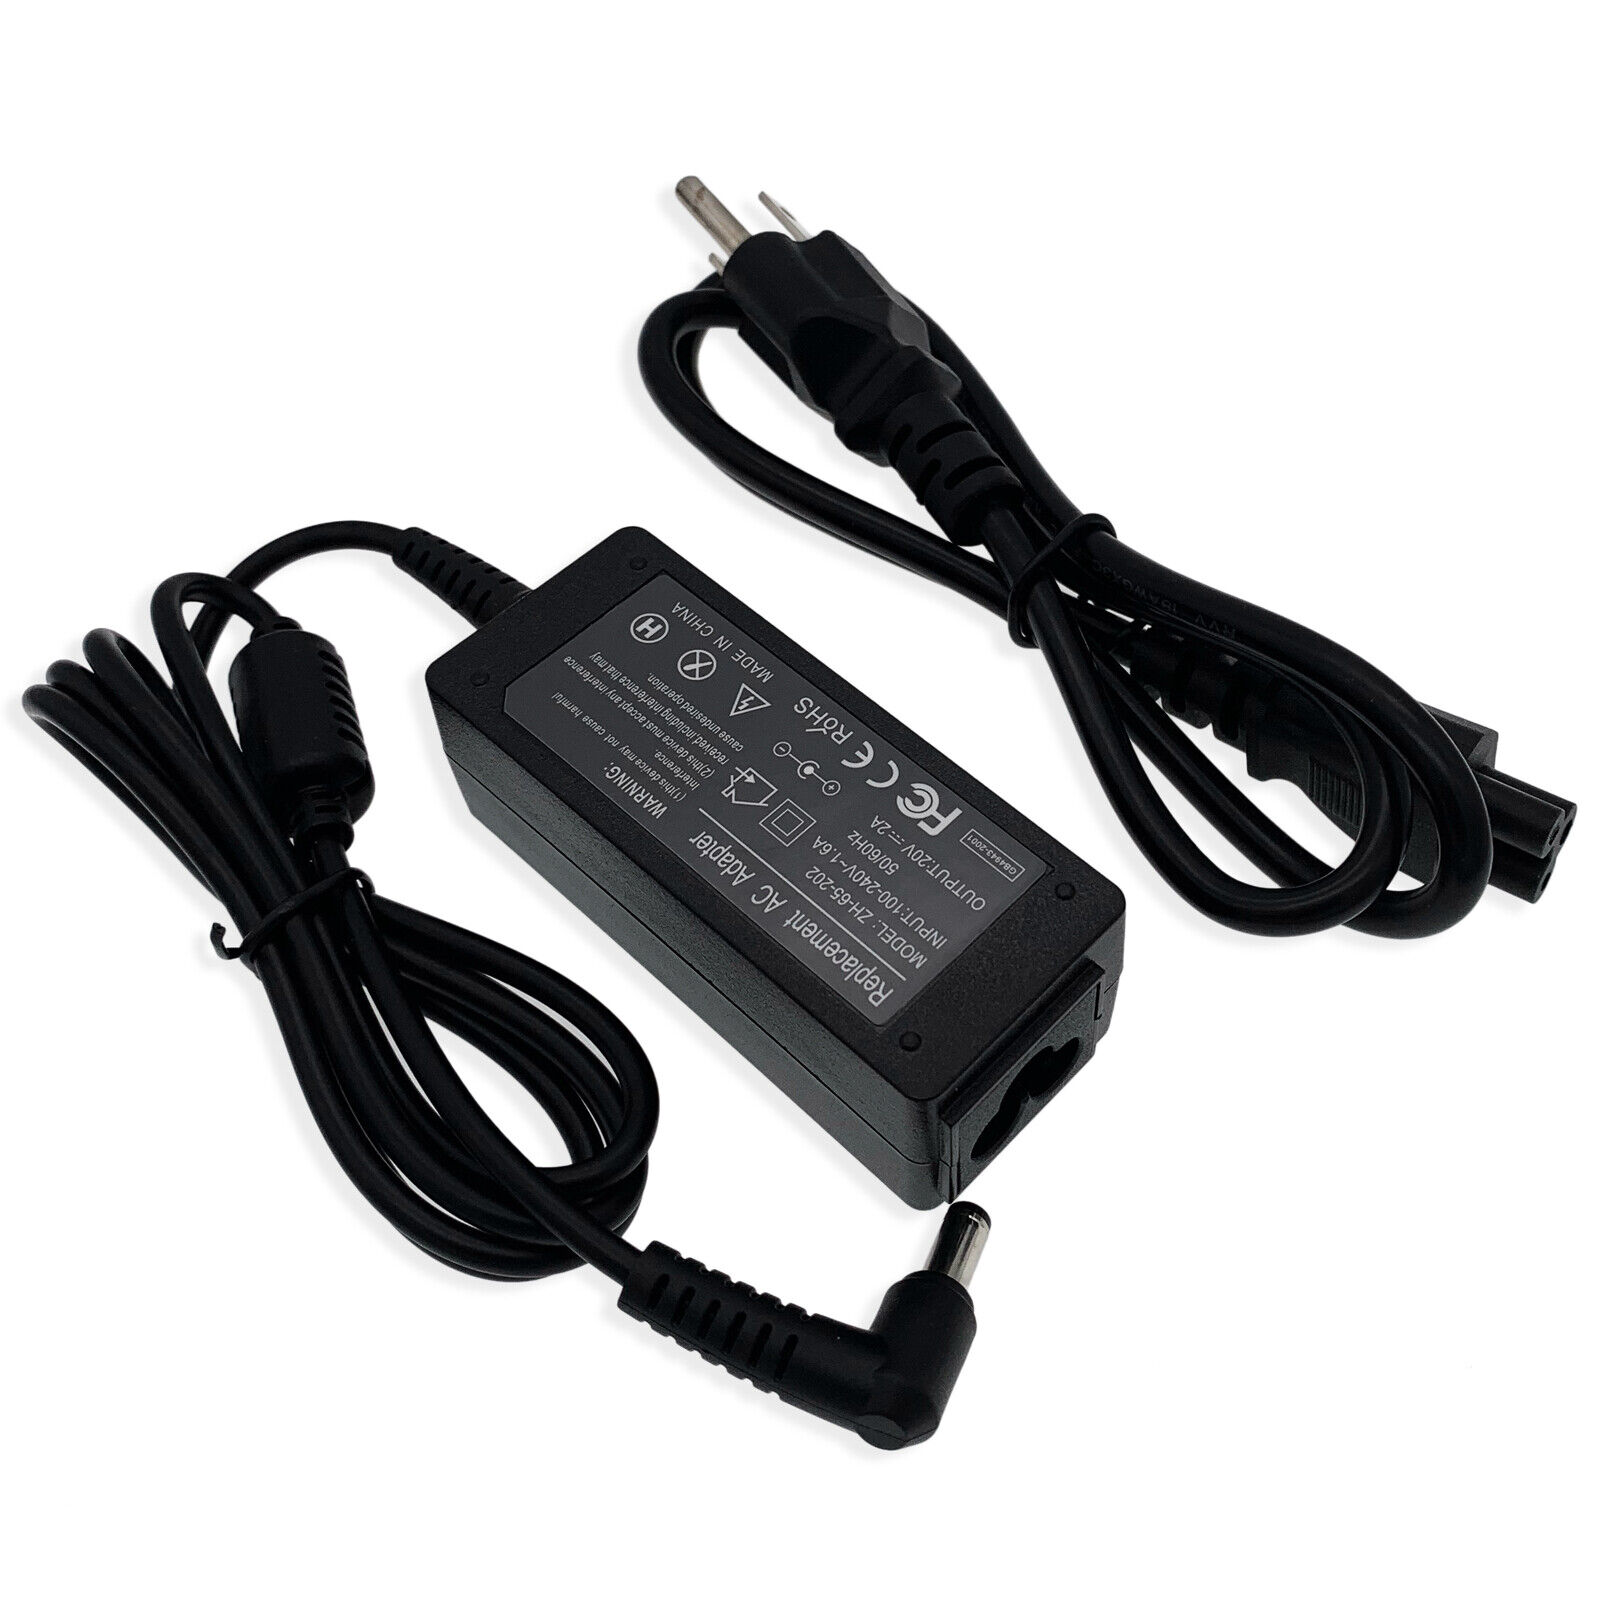 20V AC /DC Adapter for Sound Link Wireless Speaker System Charger Power Cord